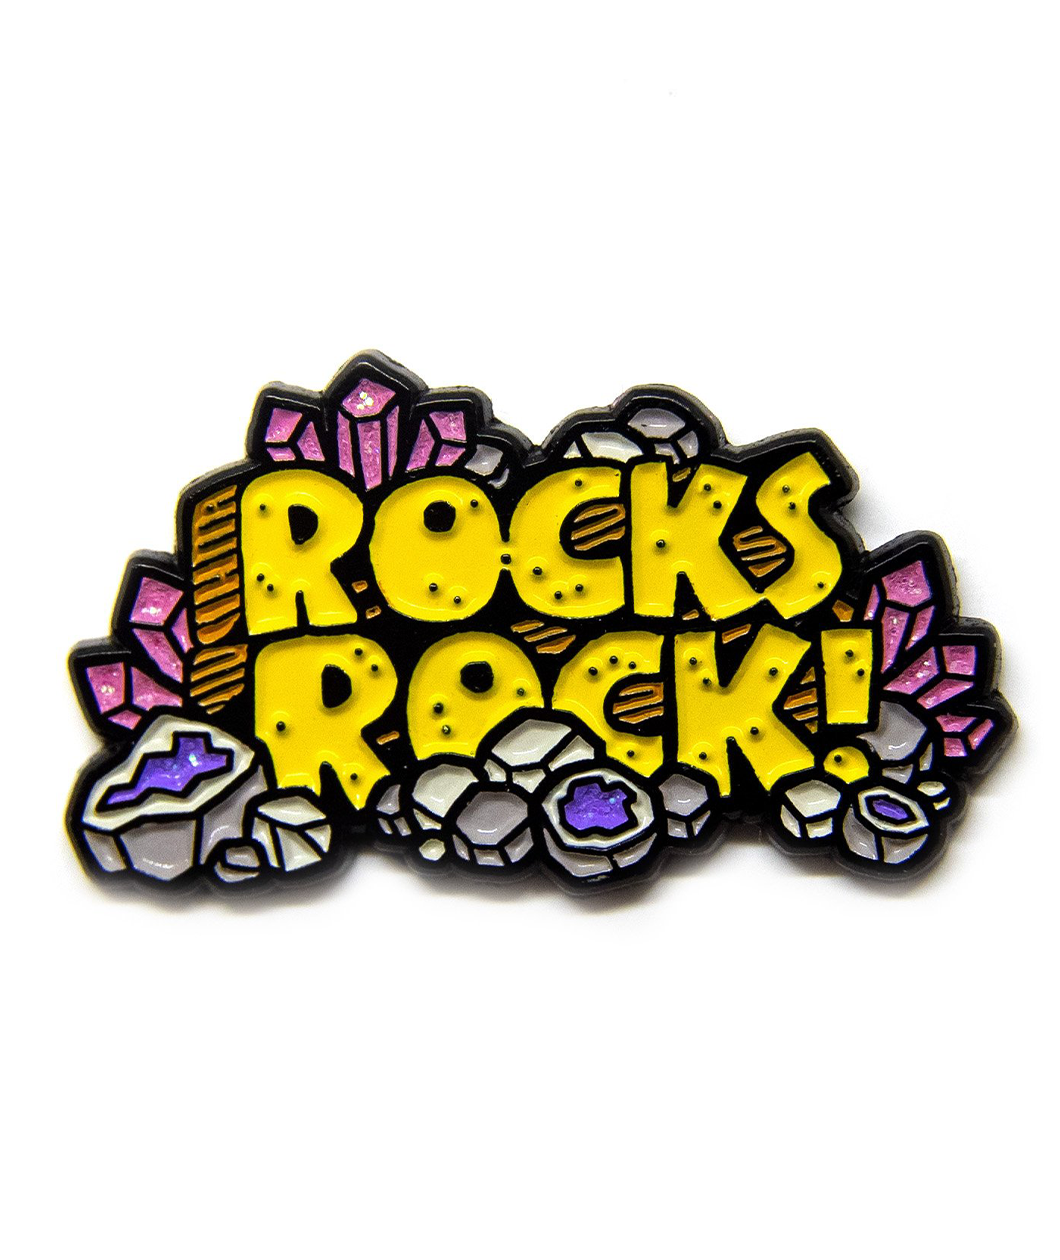 Black Plated enamel pin with the words ROCKS ROCK! illustrated in yellow to look like bedrock, surrounded by pink glittery crystals and cut open geodes with glittery purple enamel to signify the amythest inside.